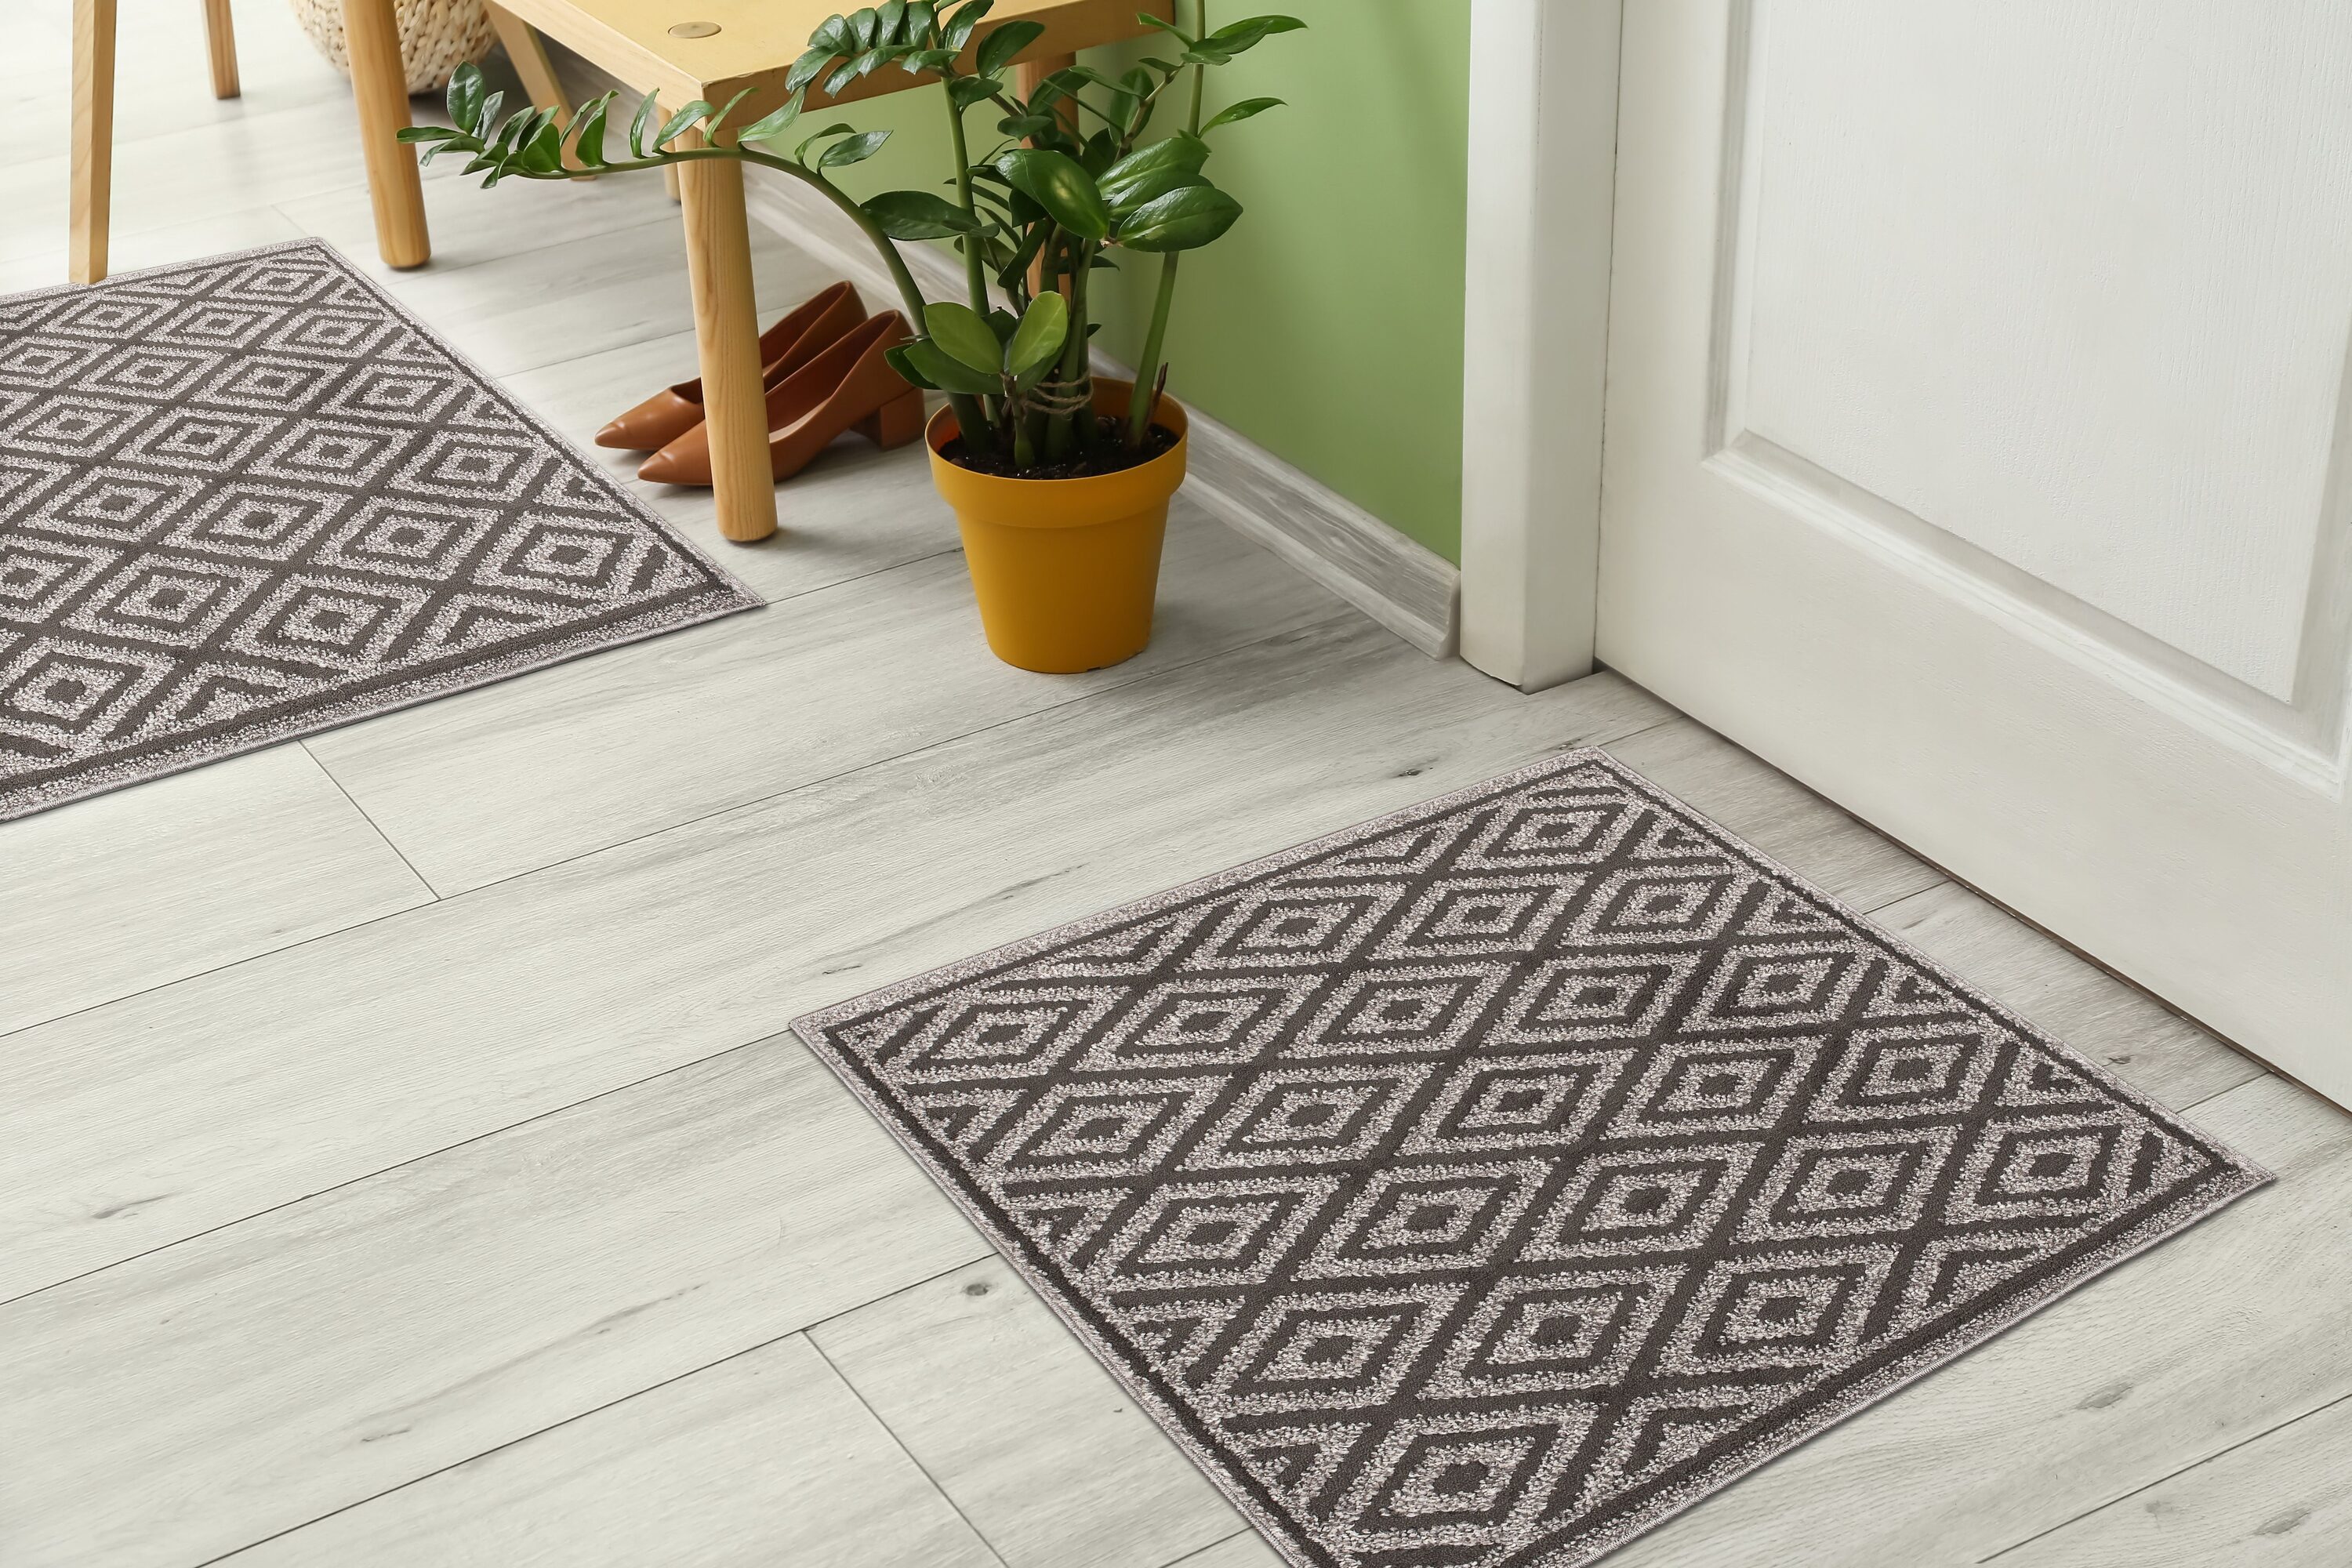 The Sofia Rugs Sofihas 2 Piece Kitchen Rug Sets 60in x 24in x 35in x 24in  Kitchen Floor Mats 100% Shag Polypropylene Farmhouse Washable Kitchen Rugs  and Mats with Non Skid Rubber